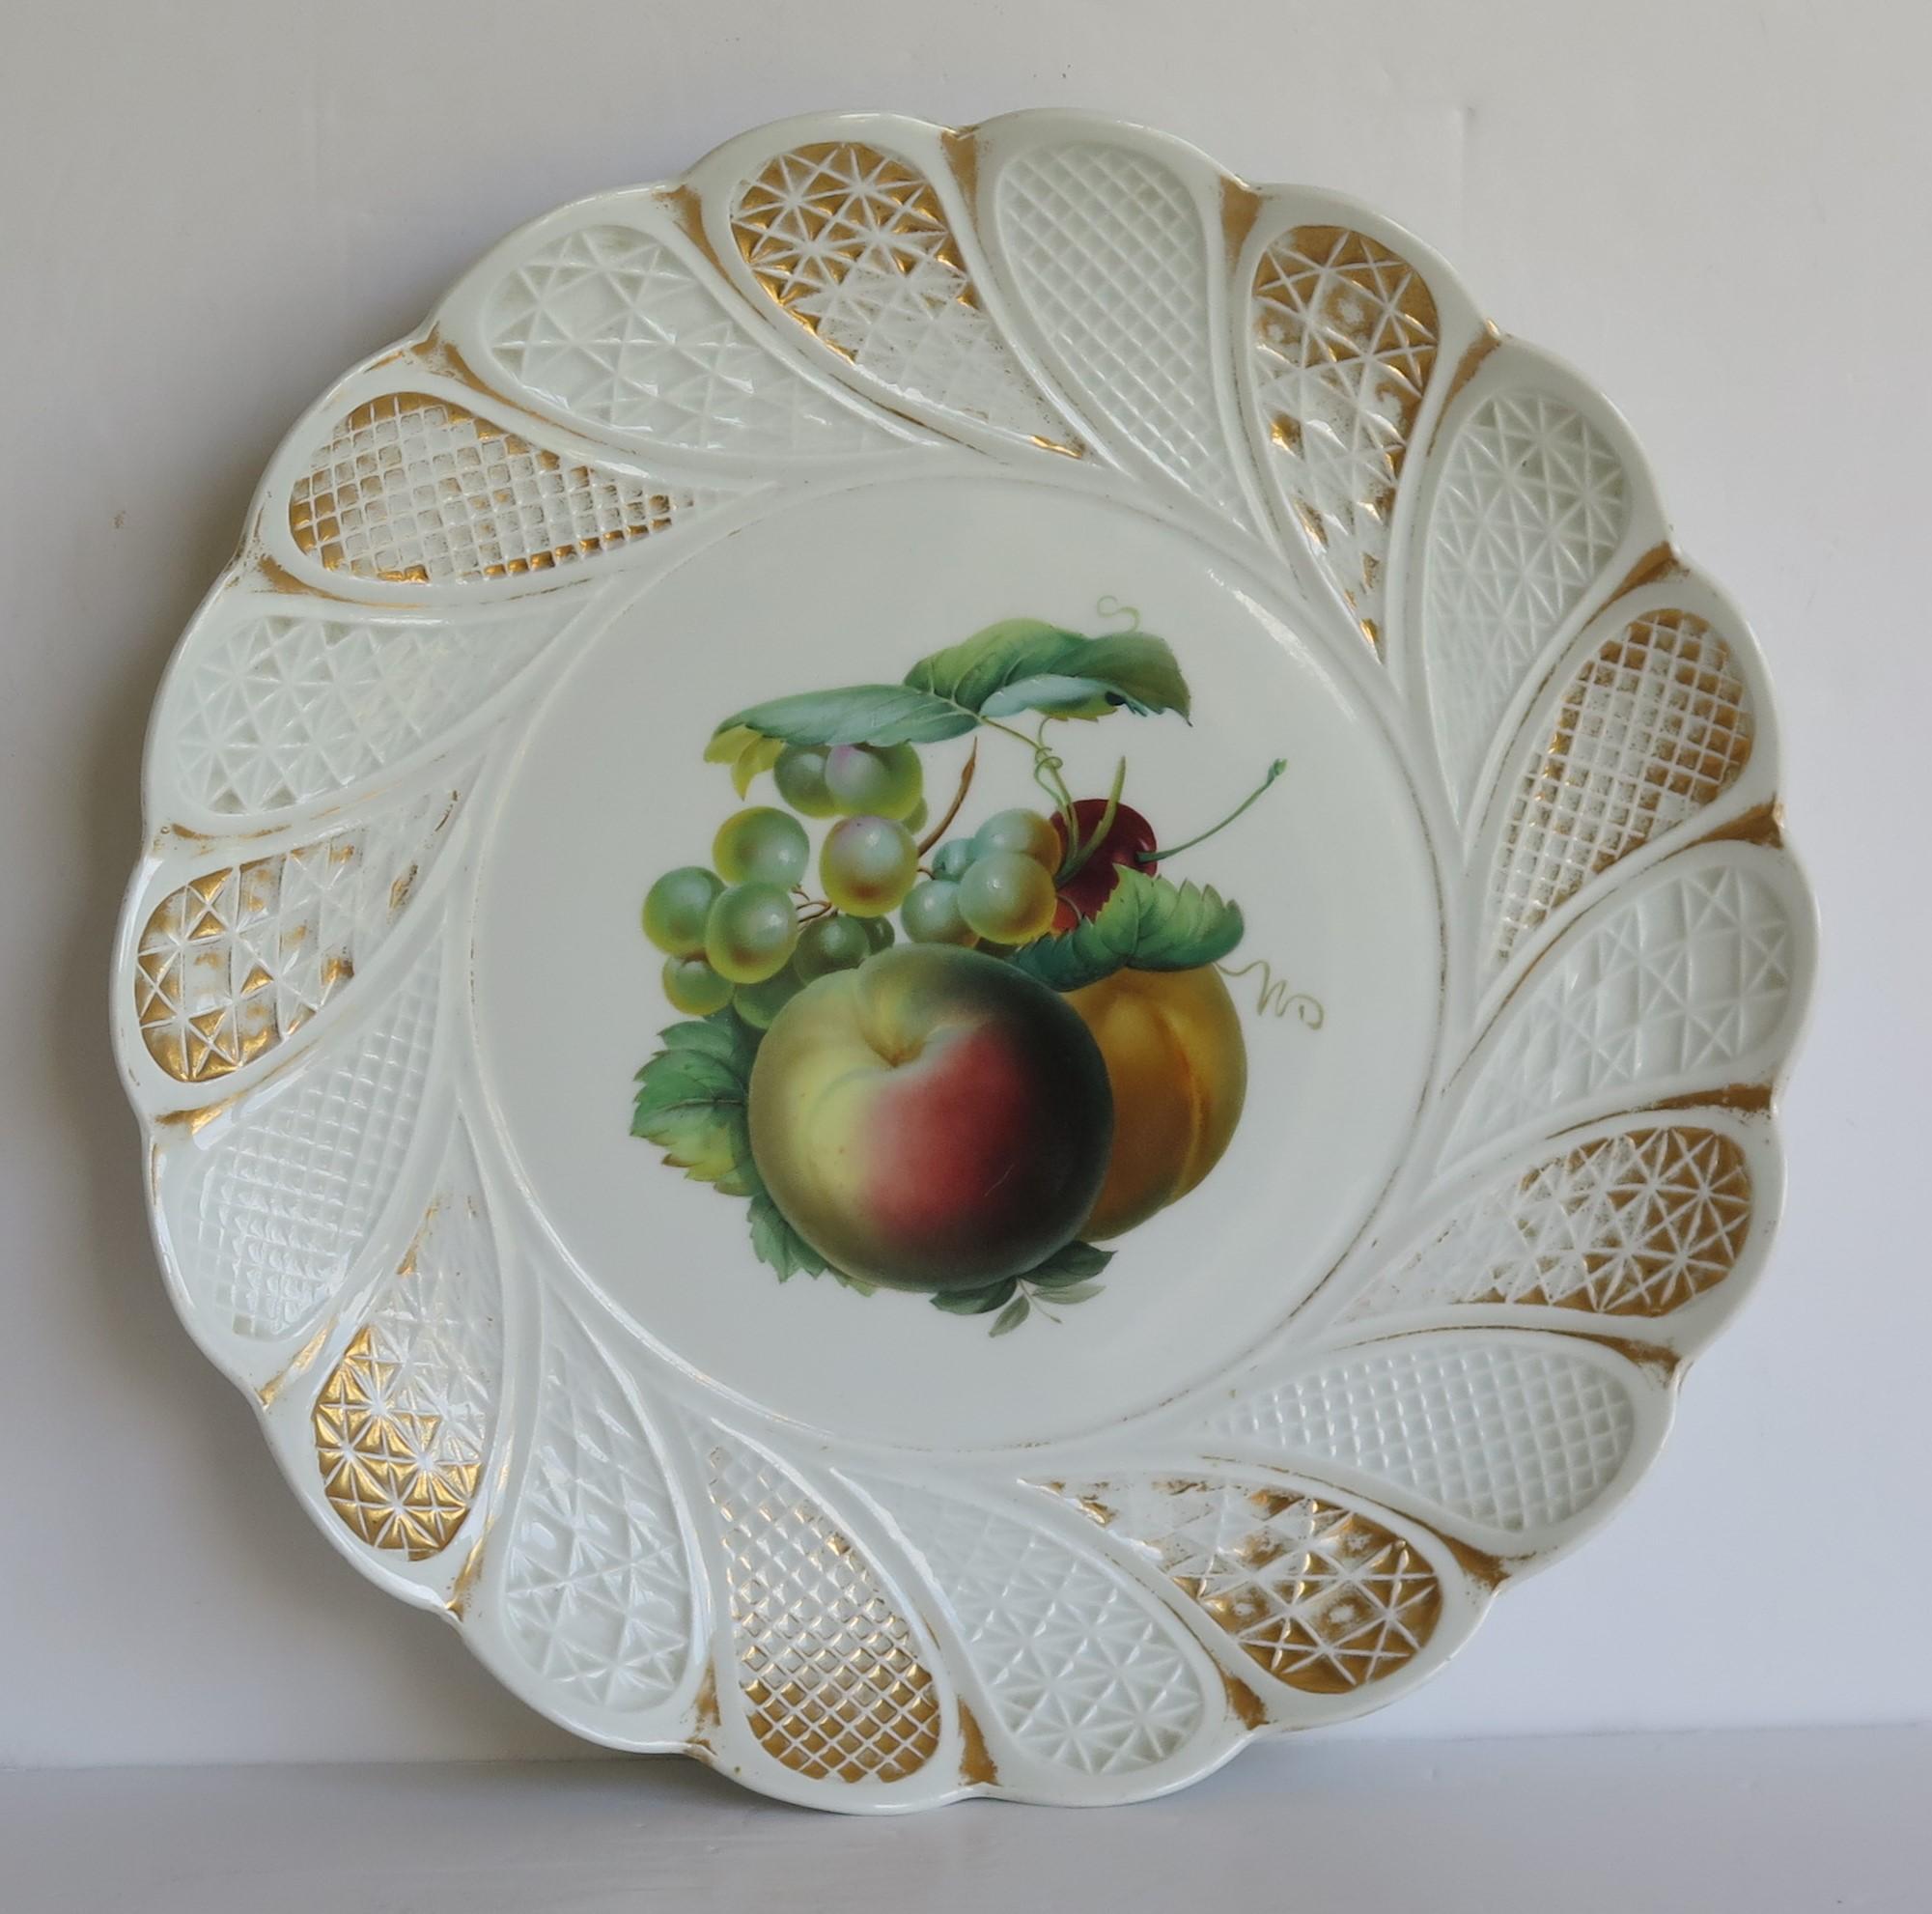 19th Century Meissen Porcelain Large Plate or Charger Hand Painted and Gilded, circa 1870 For Sale